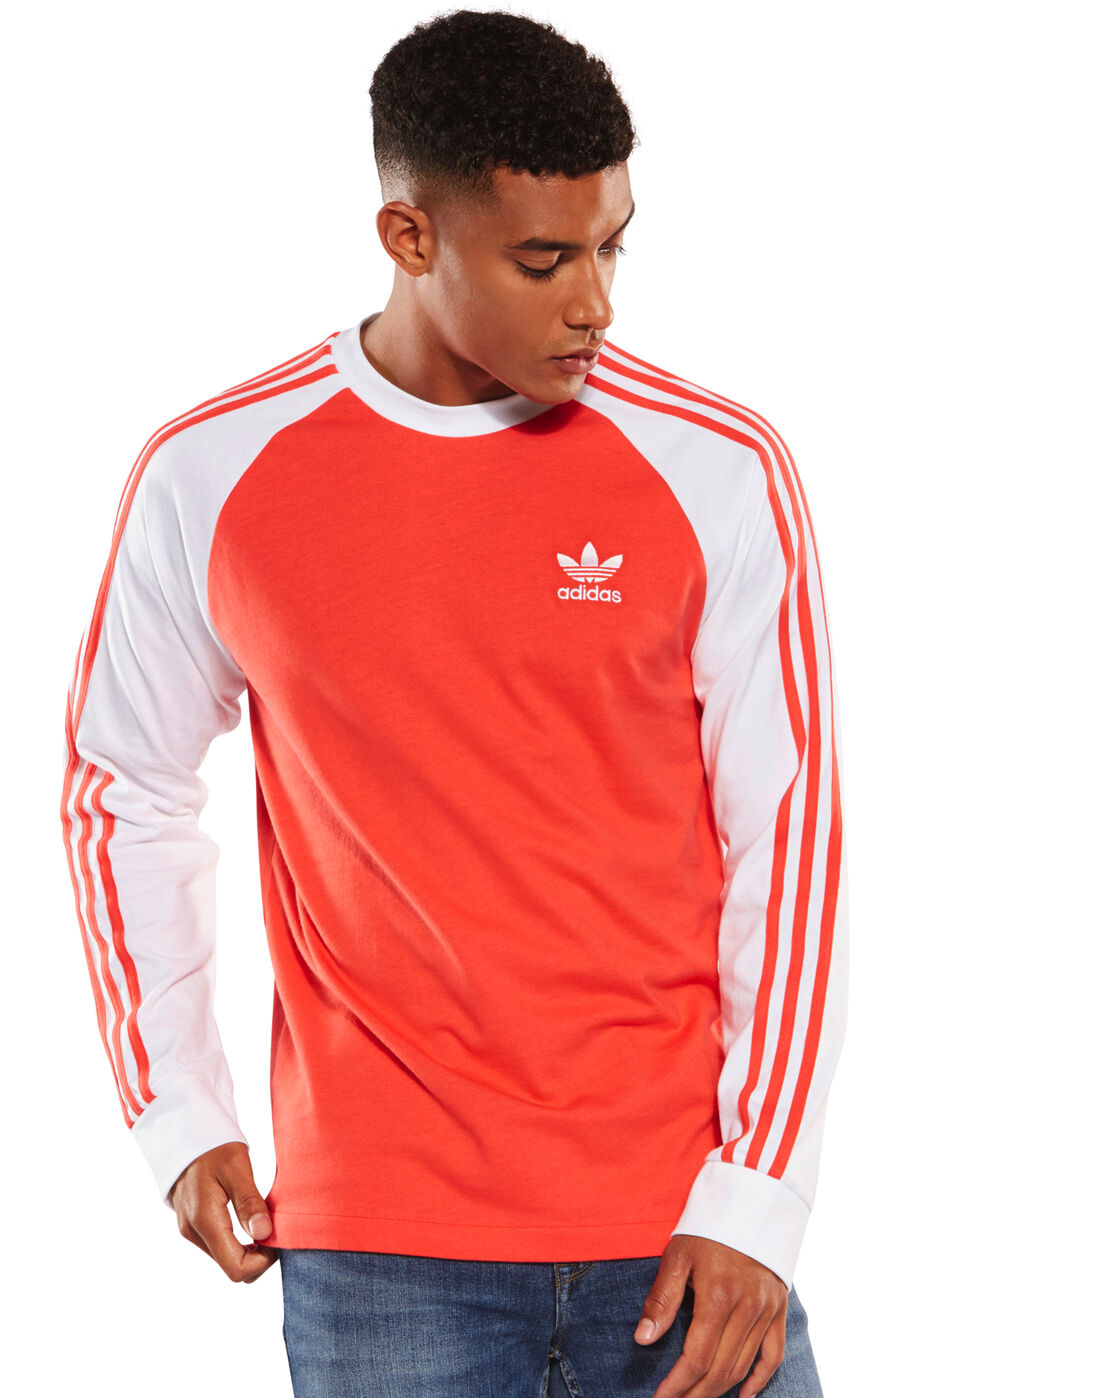 red adidas top mens